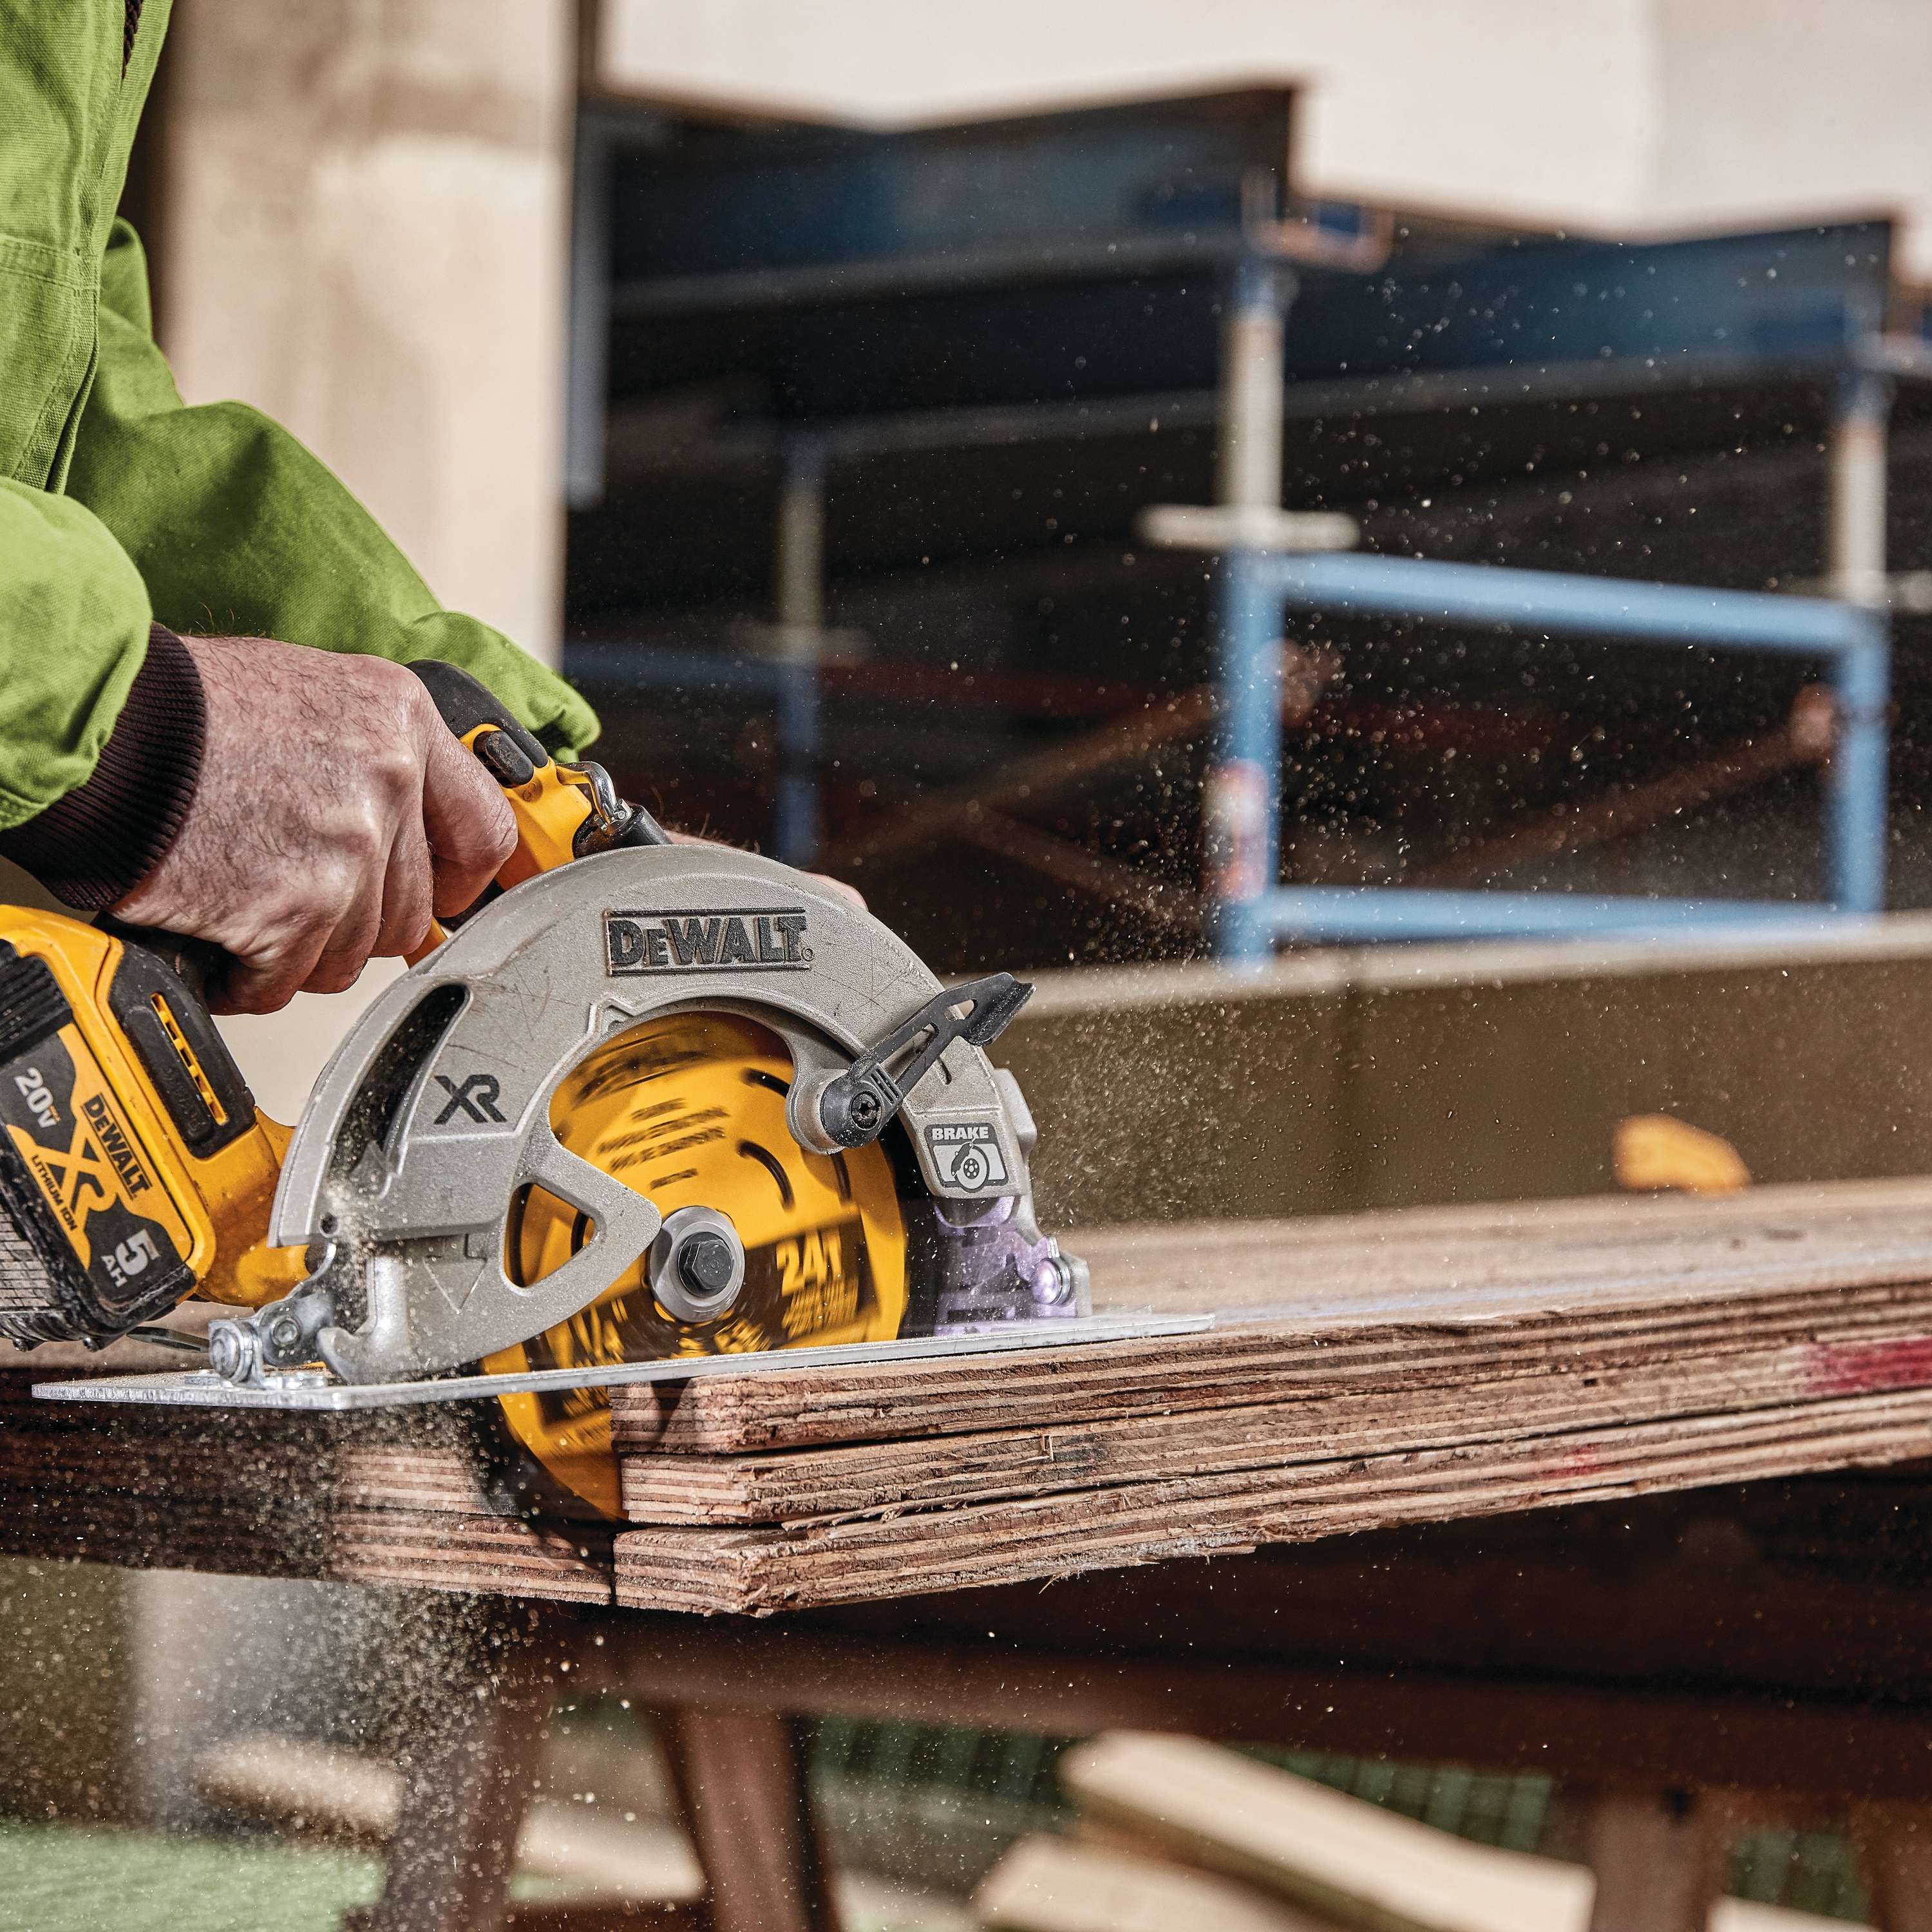 Seven and a Quarter inch Circular Saw Blades in use.